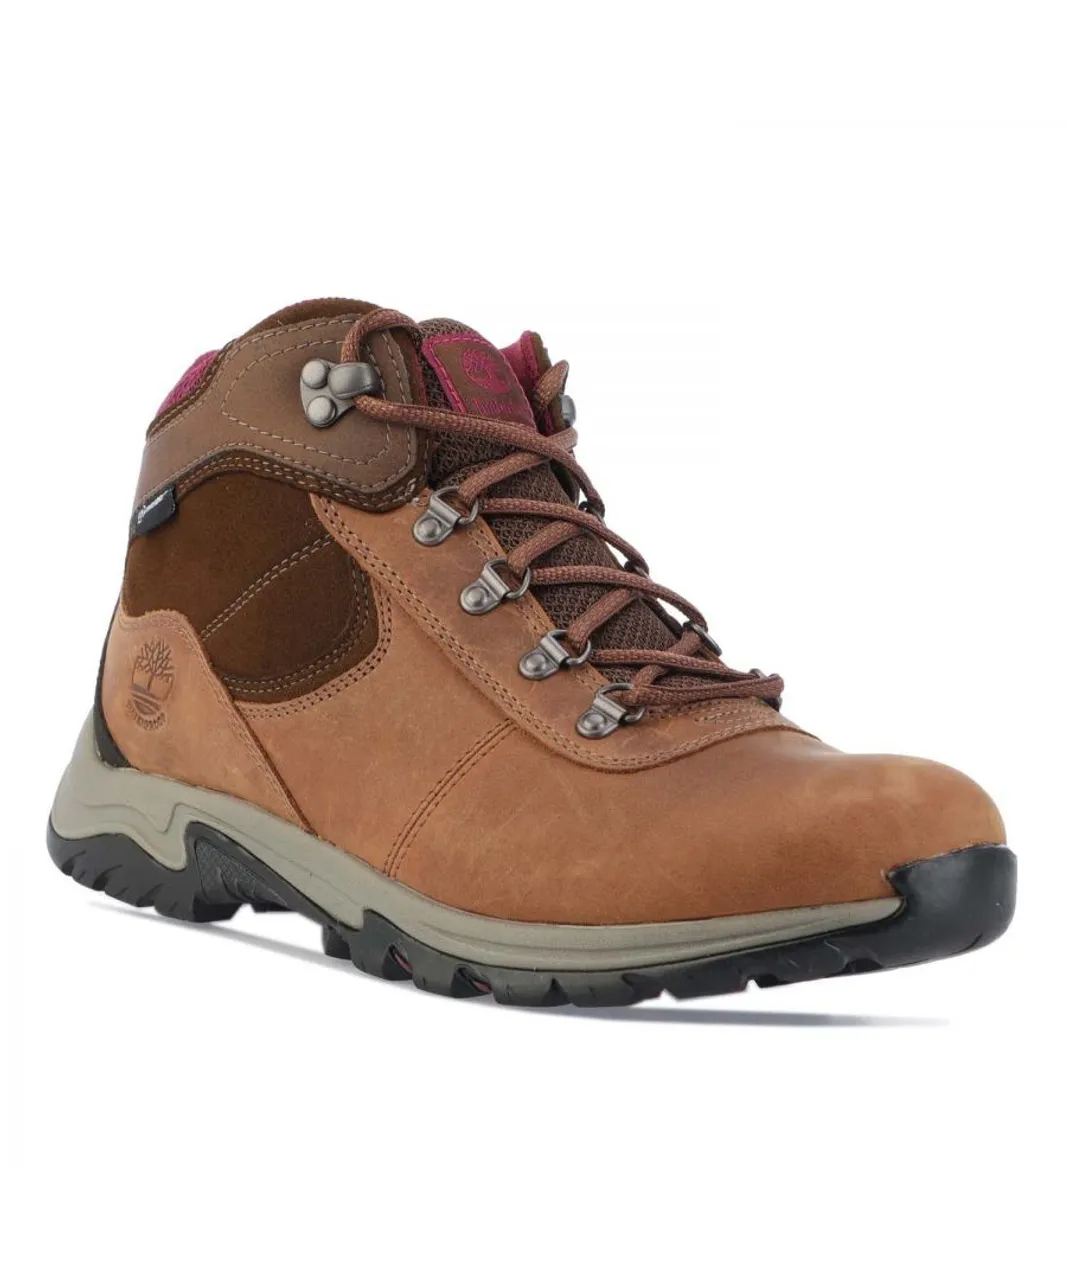 Timberland Womenss Mt. Maddsen Mid Waterproof Hiker Boots in Brown Leather (archived)